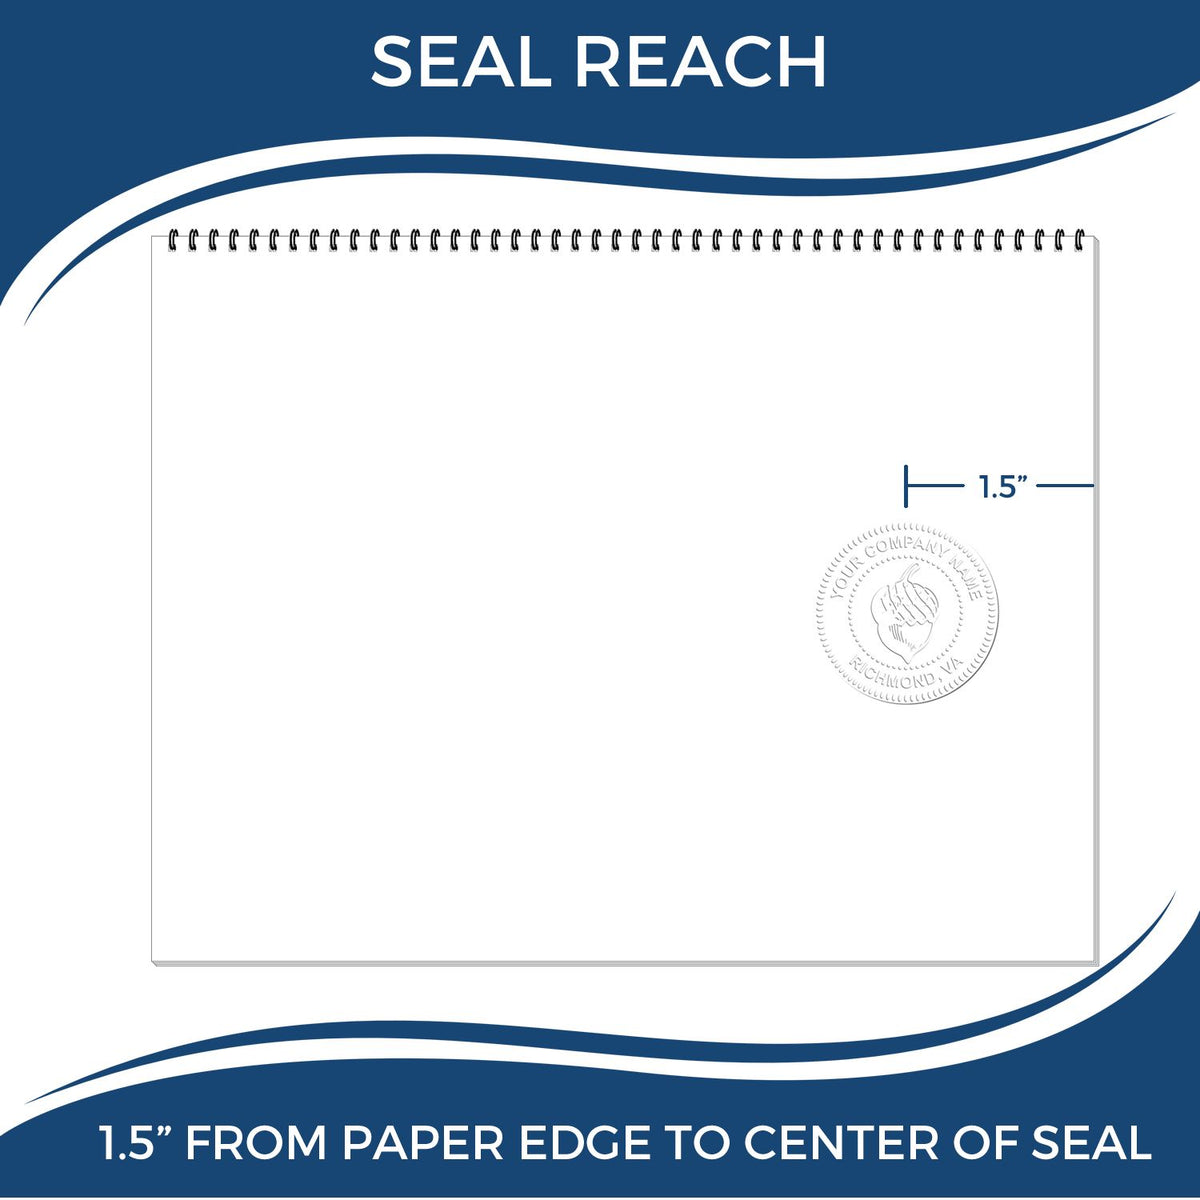 An infographic showing the seal reach which is represented by a ruler and a miniature seal image of the Gift Alaska Engineer Seal